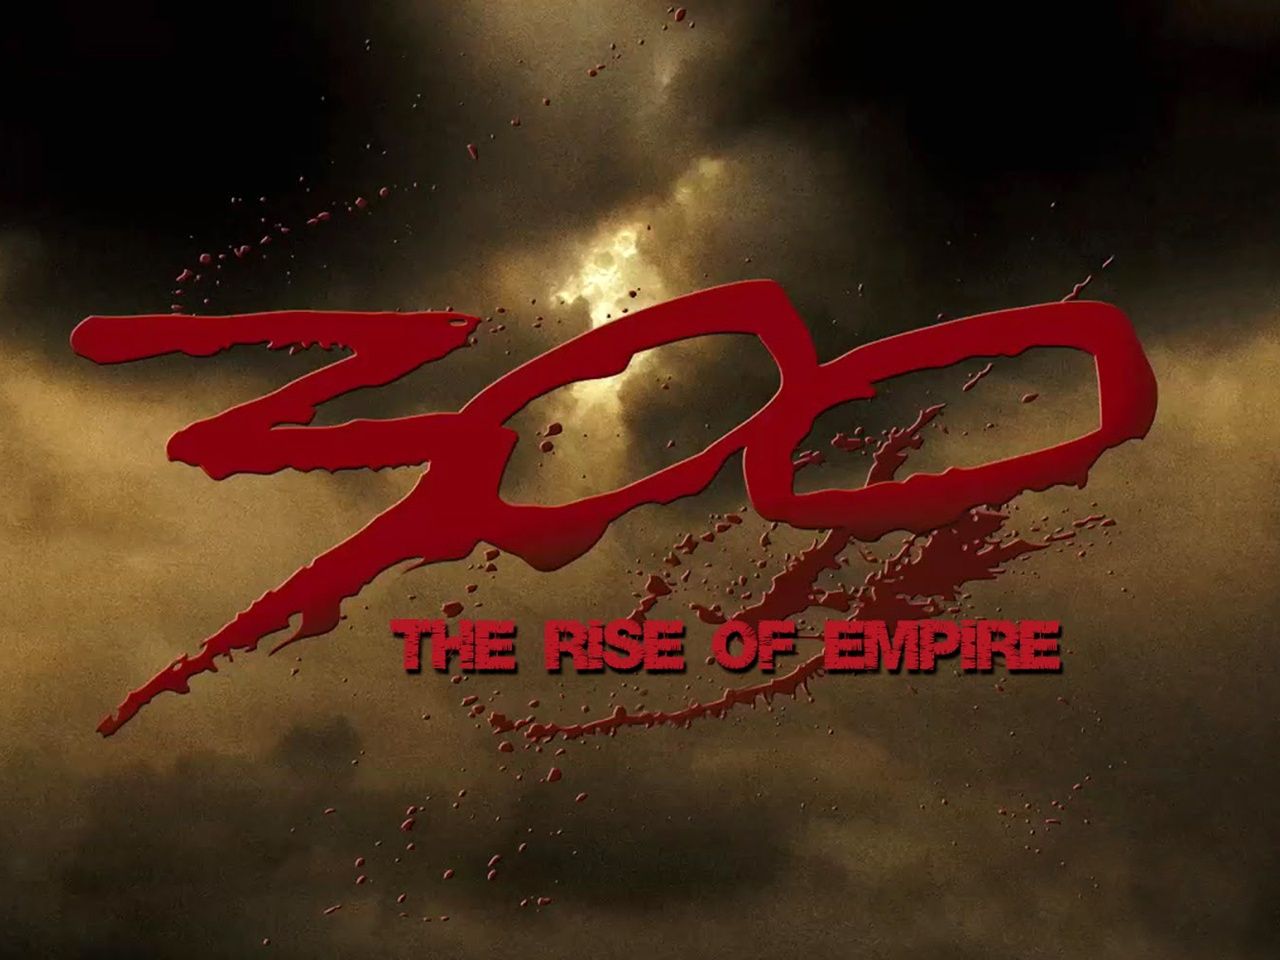 300 Rise Of An Empire movie actress hd wallpaper free Daily pics